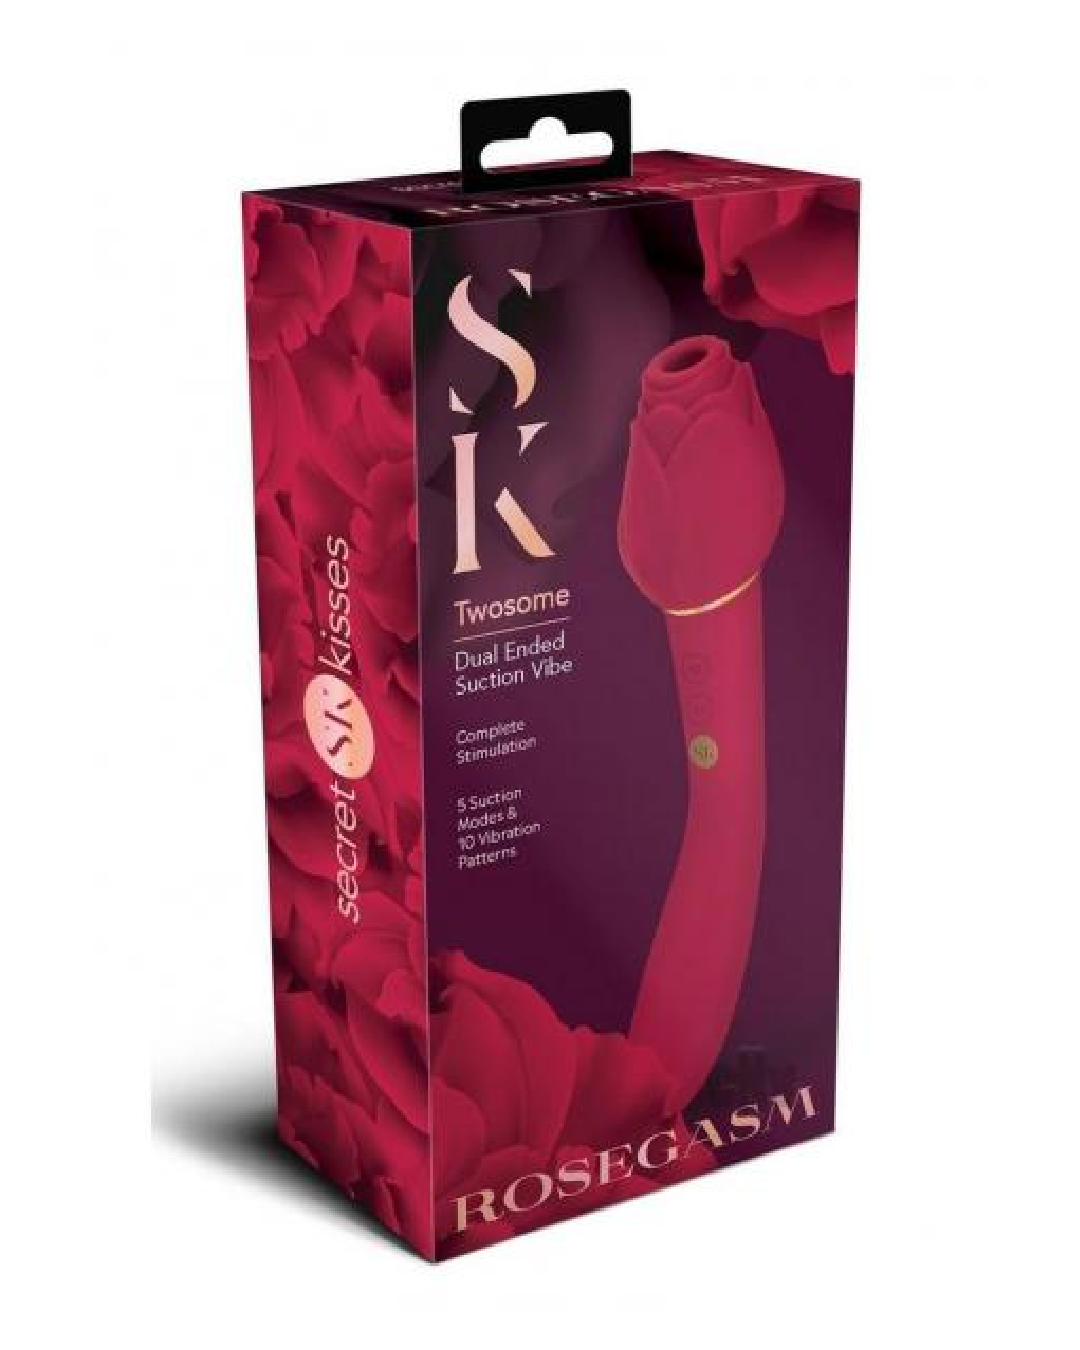 Rosegasm Twosome Double Ended Air Pulsation Vibrator Product box 